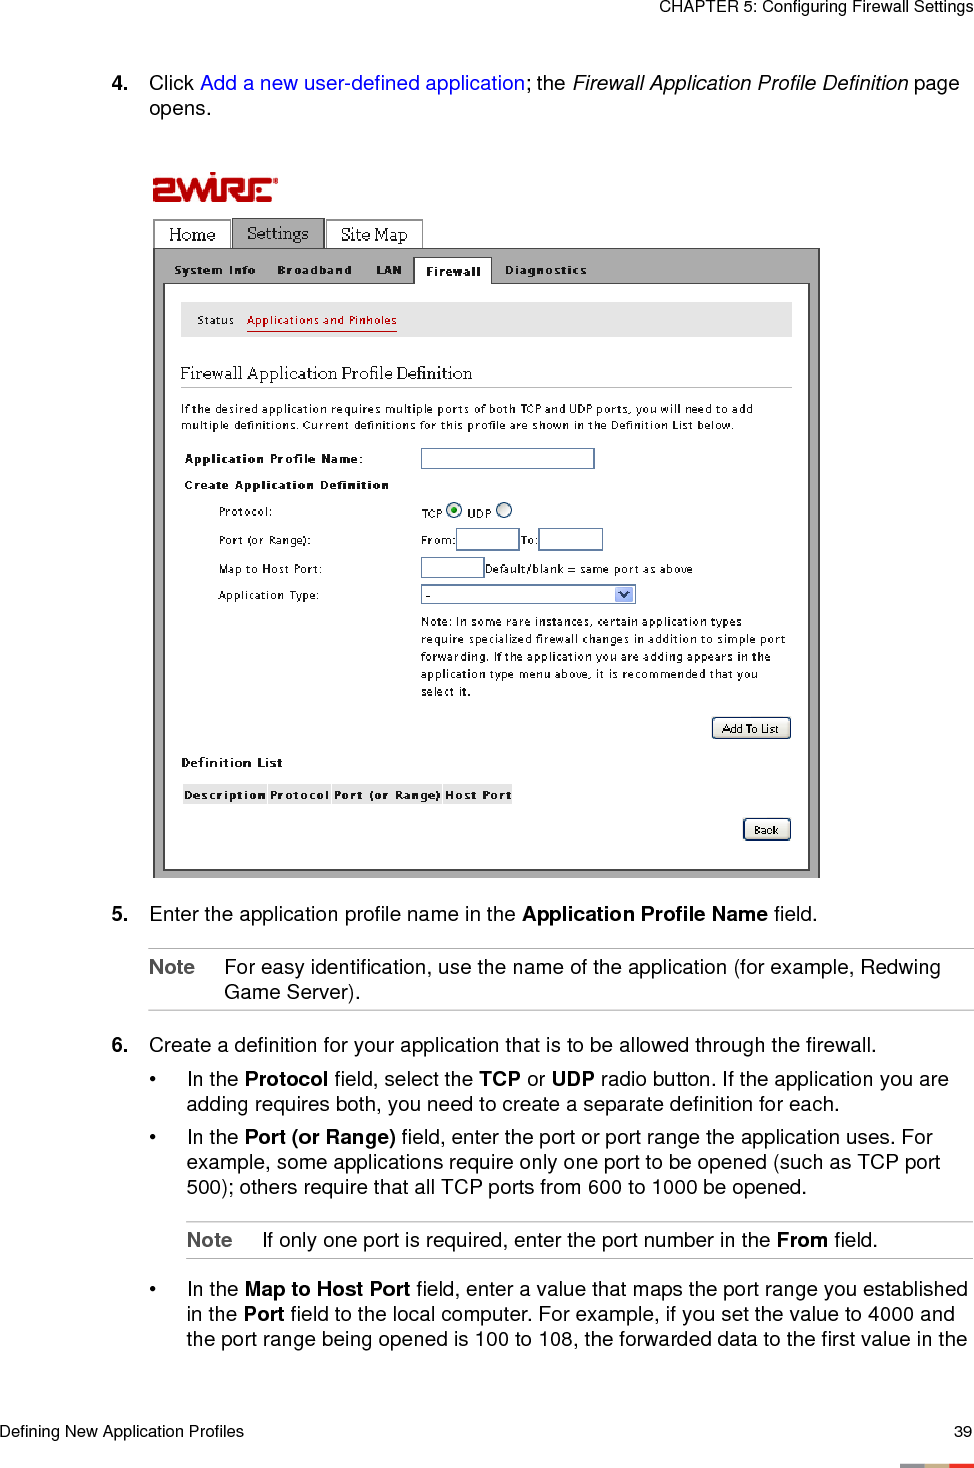 Defining New Application Profiles 39CHAPTER 5: Configuring Firewall Settings4. Click Add a new user-defined application; the Firewall Application Profile Definition page opens.5. Enter the application profile name in the Application Profile Name field. Note For easy identification, use the name of the application (for example, Redwing Game Server).6. Create a definition for your application that is to be allowed through the firewall. • In the Protocol field, select the TCP or UDP radio button. If the application you are adding requires both, you need to create a separate definition for each.• In the Port (or Range) field, enter the port or port range the application uses. For example, some applications require only one port to be opened (such as TCP port 500); others require that all TCP ports from 600 to 1000 be opened. Note If only one port is required, enter the port number in the From field. • In the Map to Host Port field, enter a value that maps the port range you established in the Port field to the local computer. For example, if you set the value to 4000 and the port range being opened is 100 to 108, the forwarded data to the first value in the 